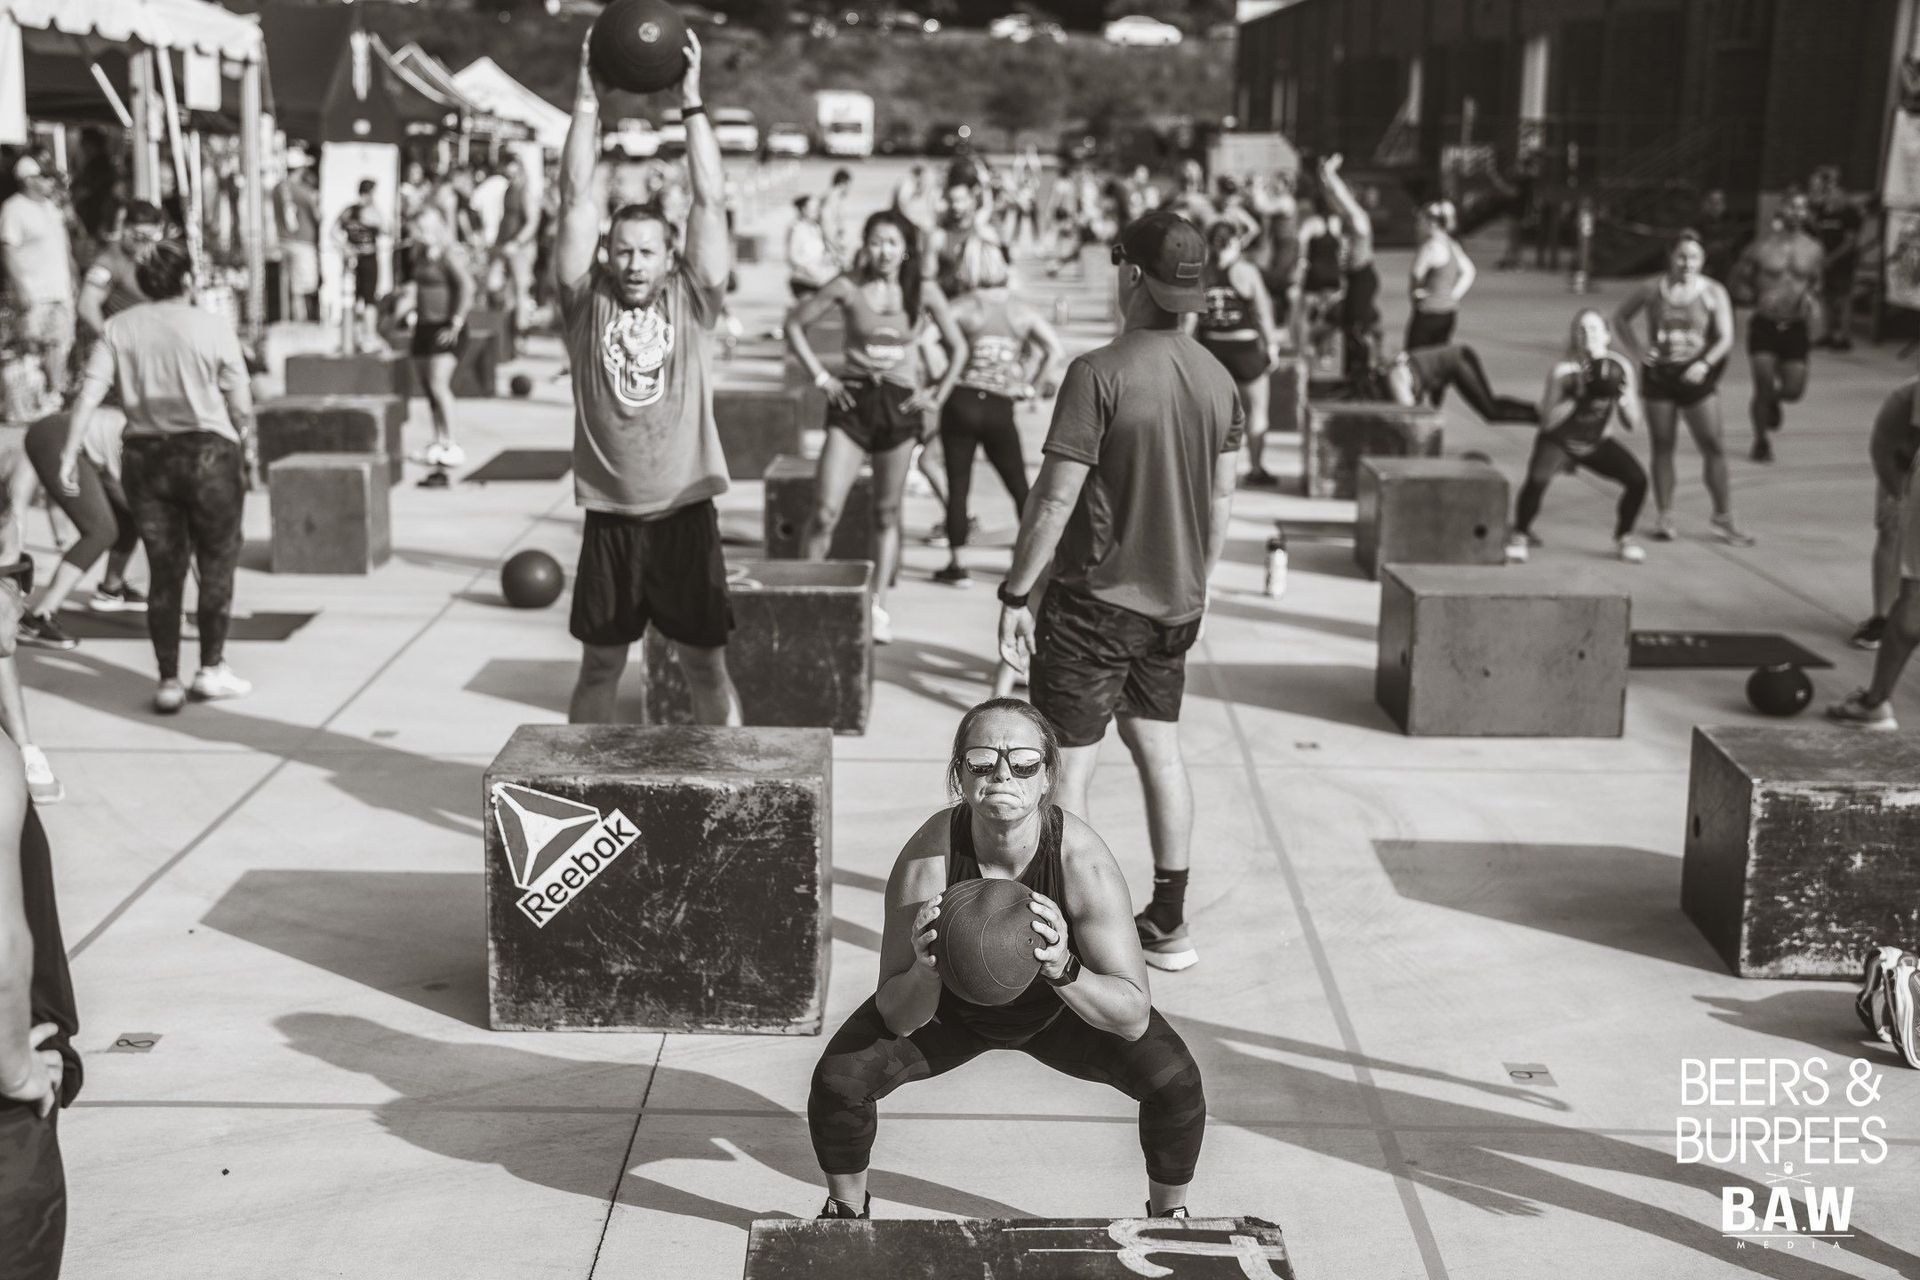 A group of people performing at a CrossFit event.